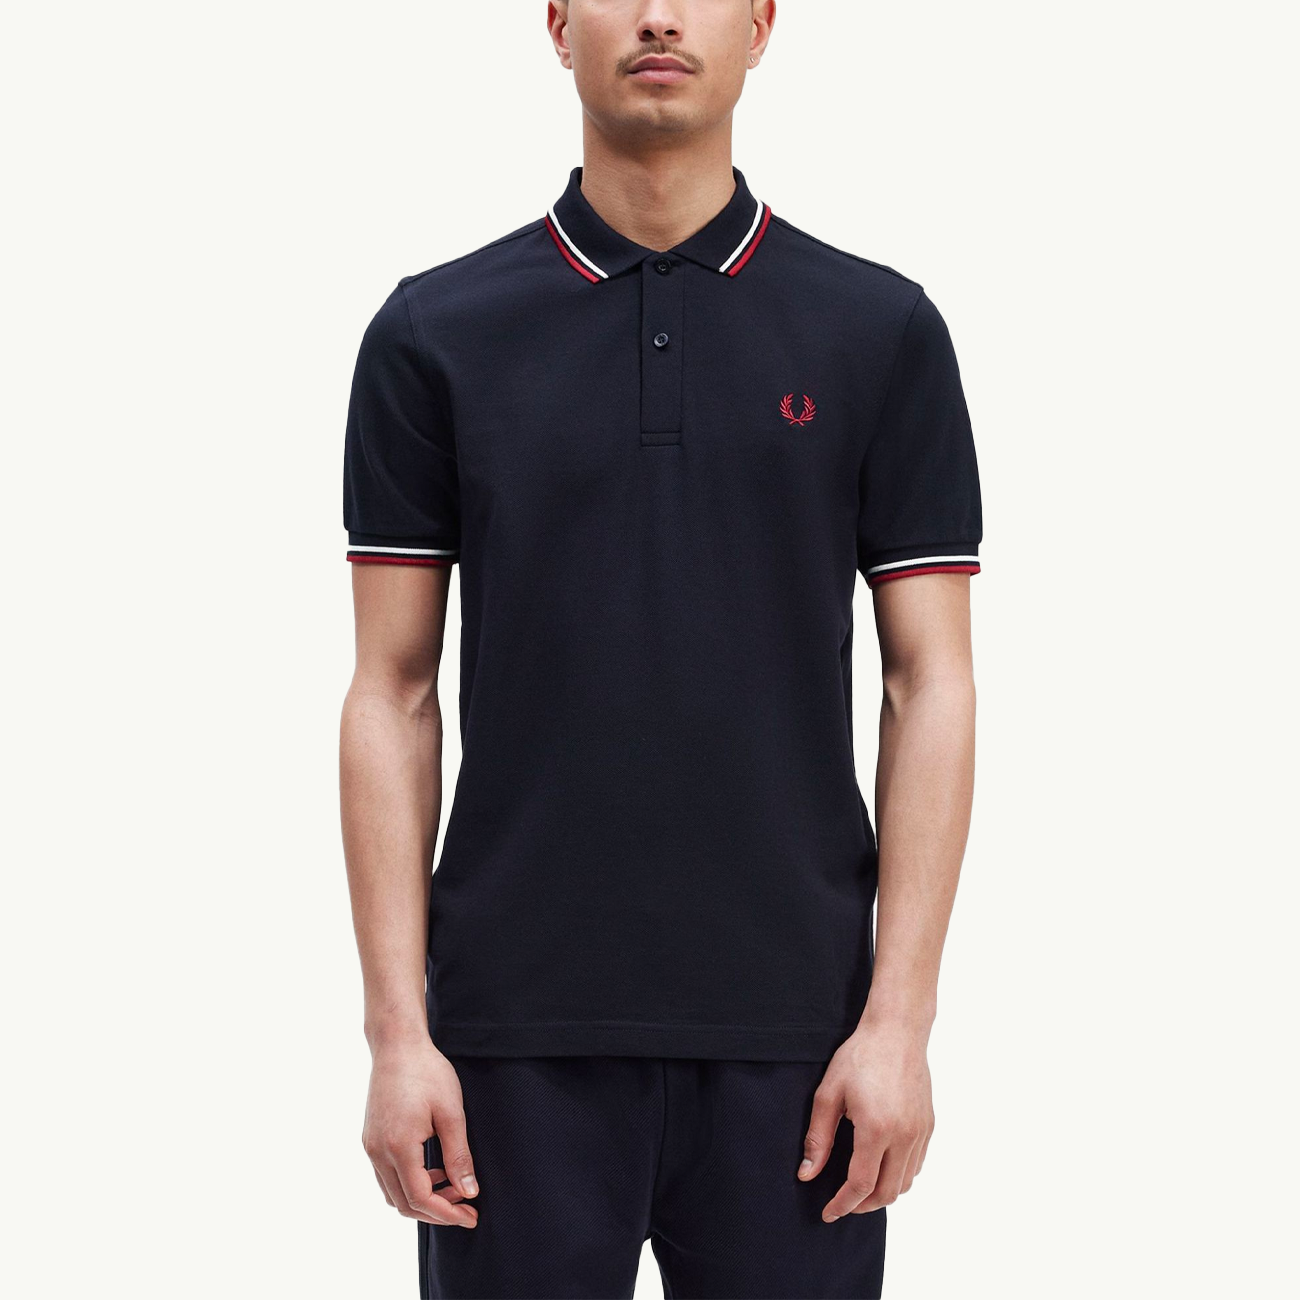 Twin Tipped Shirt - Navy/White/Red